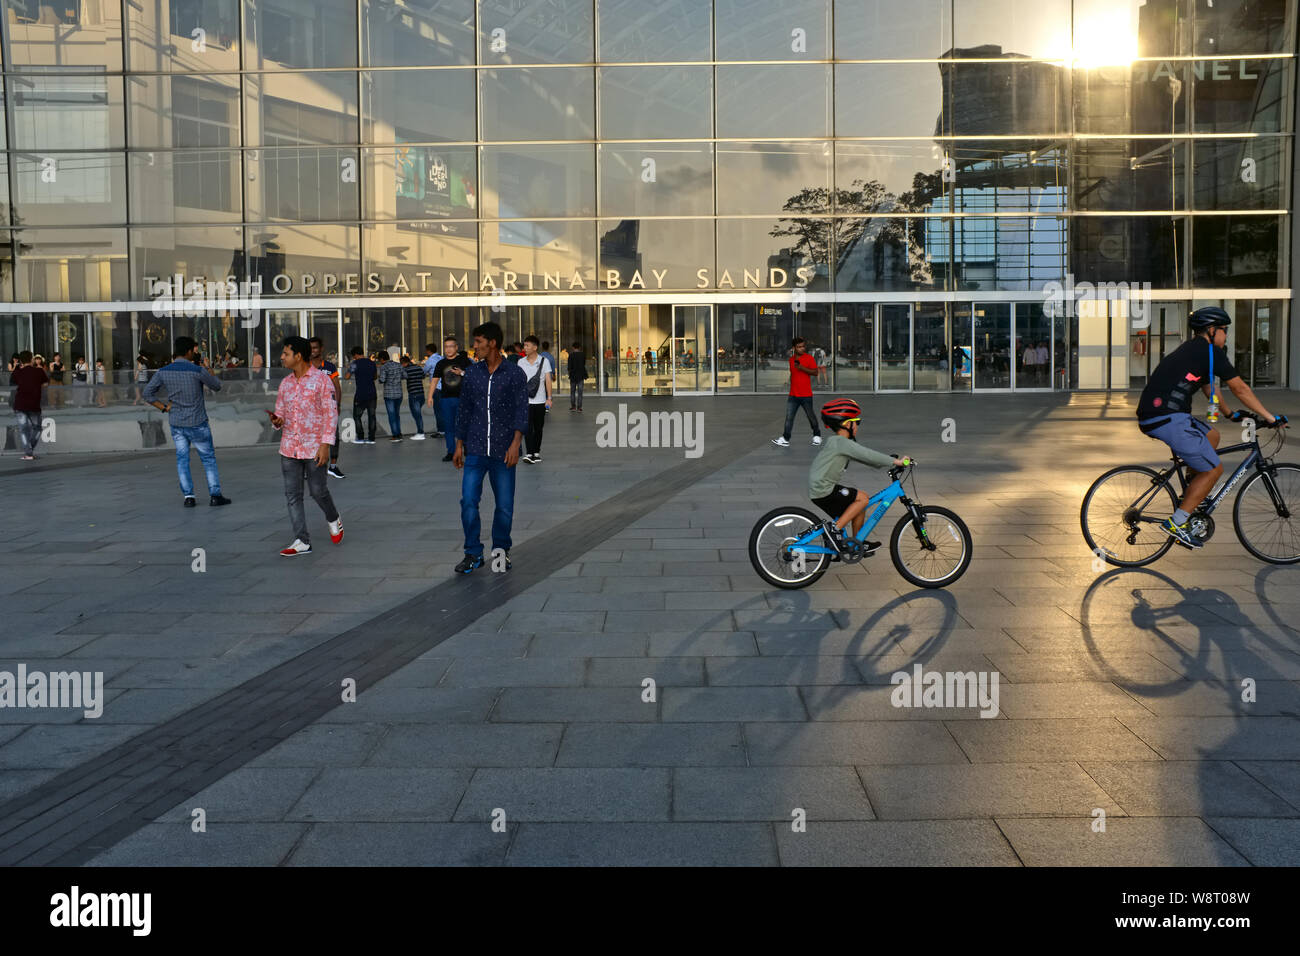 Cyclists passing The Shoppes At Marina Bay Sands, a luxury shopping mall attached to Marina Bay Sands Hotel, at the Event Plaza, Marina Bay, Singapore Stock Photo